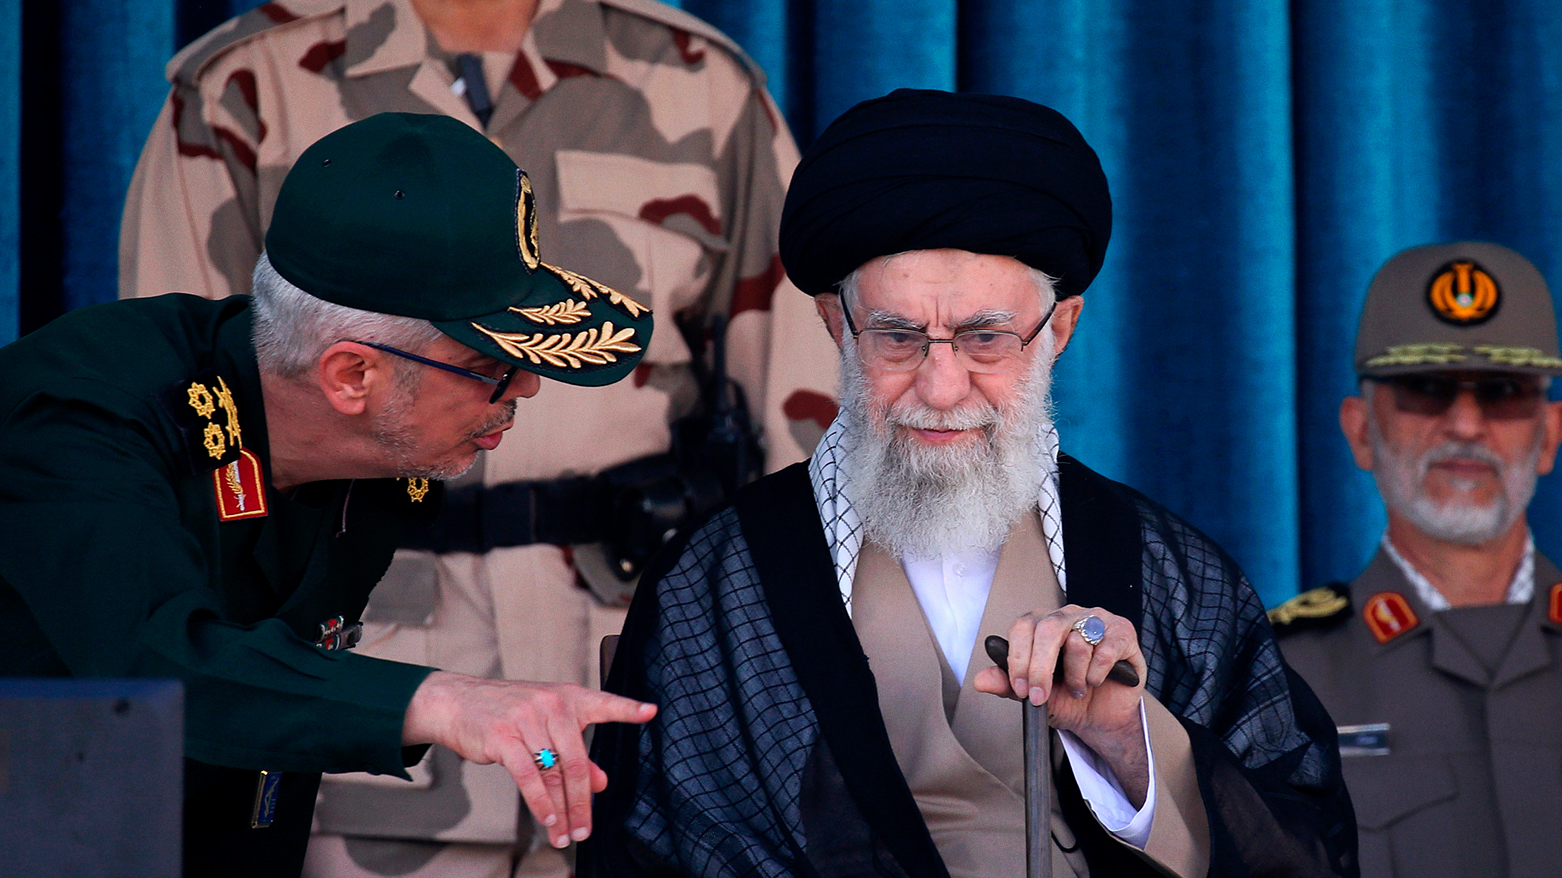 The Iranian supreme leader, Supreme Leader Ayatollah Ali Khamenei, center, listens to chief of the General Staff of the Armed Forces Gen. Mohammad Hossein Bagheri. (Photo: Office of the Iranian Supreme Leader via AP)